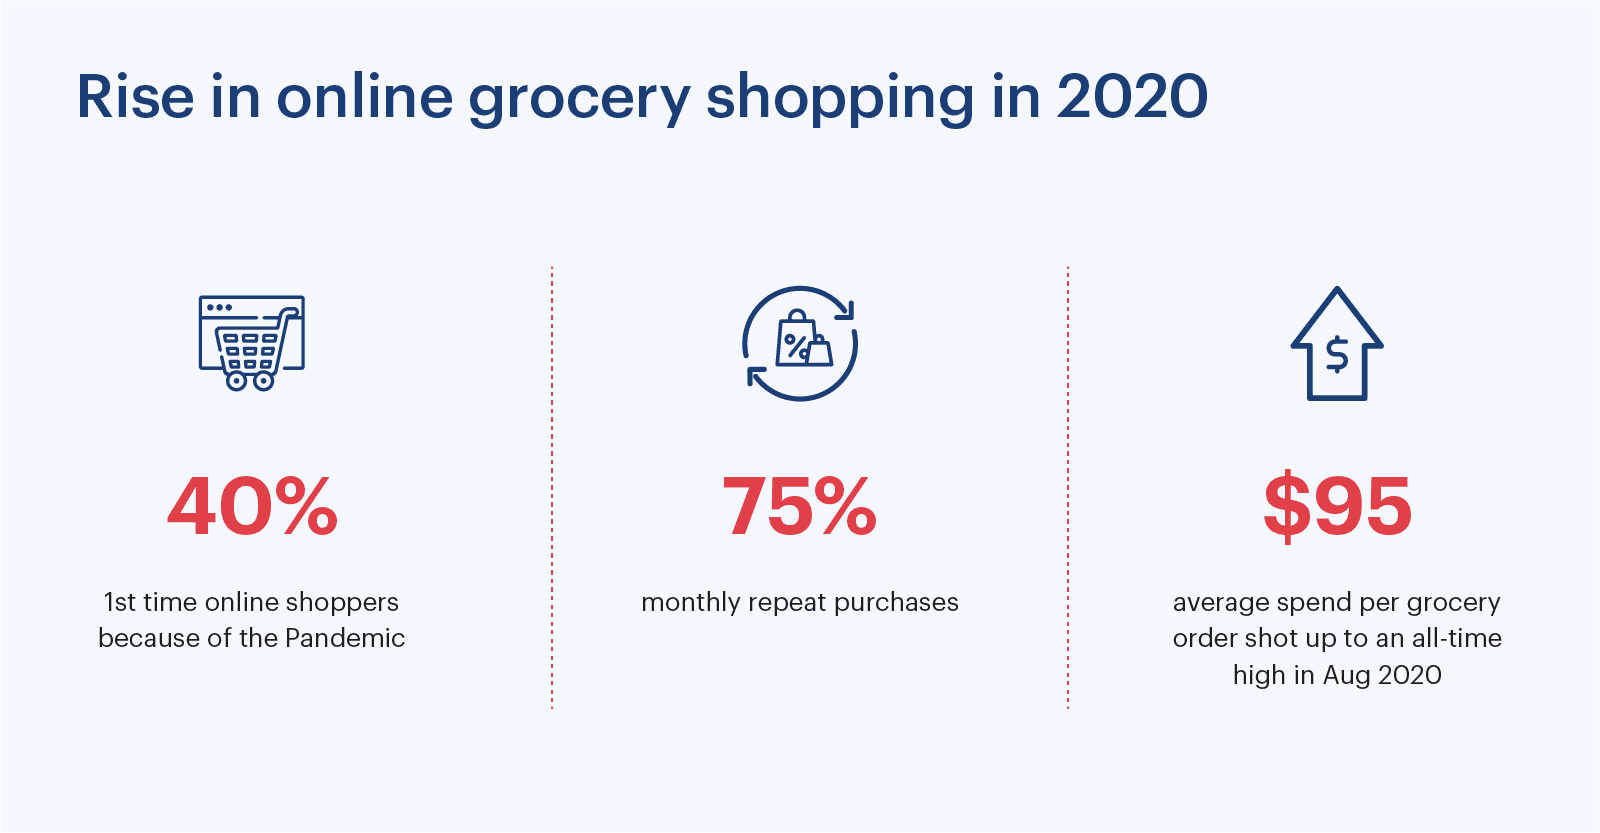 Rise in online grocery shopping this year